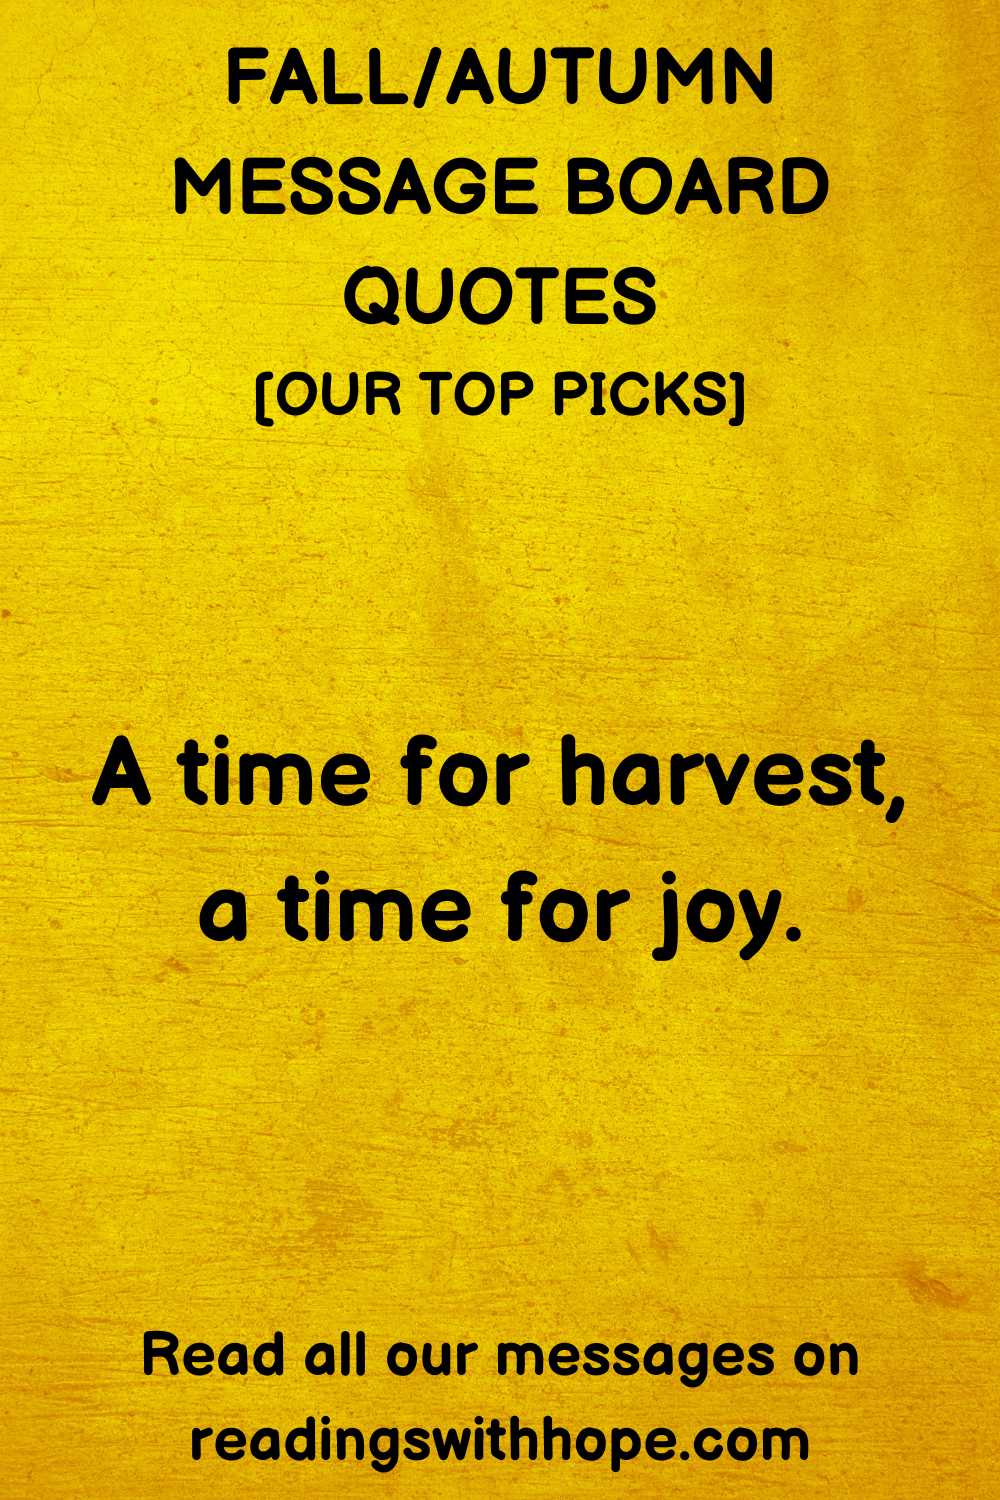 100 Fall/Autumn Message Board Quotes